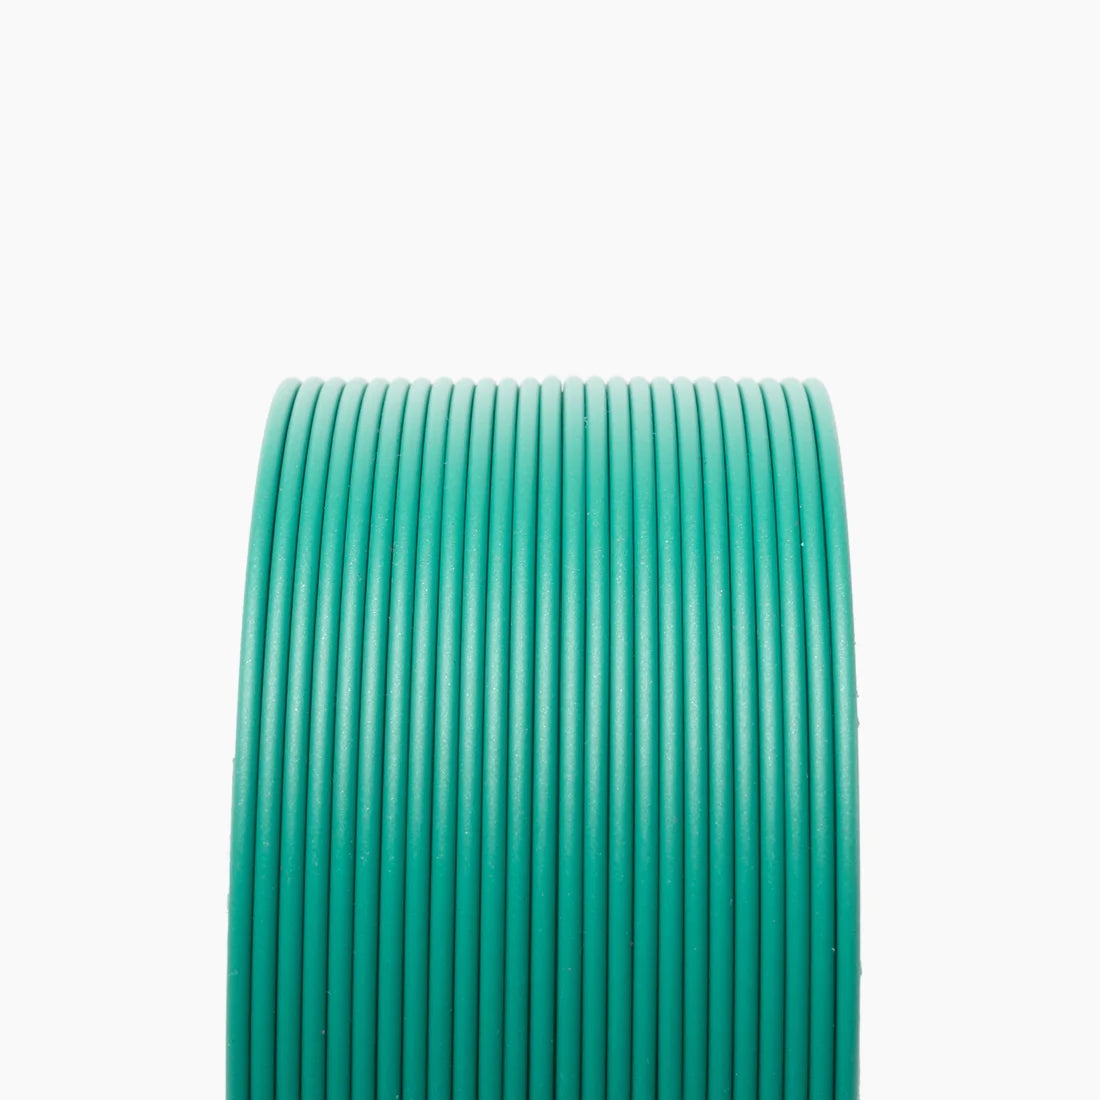 Protopasta Still Colorful Recycled PLA 018 - 1.75mm (1kg) - Greenish Teal